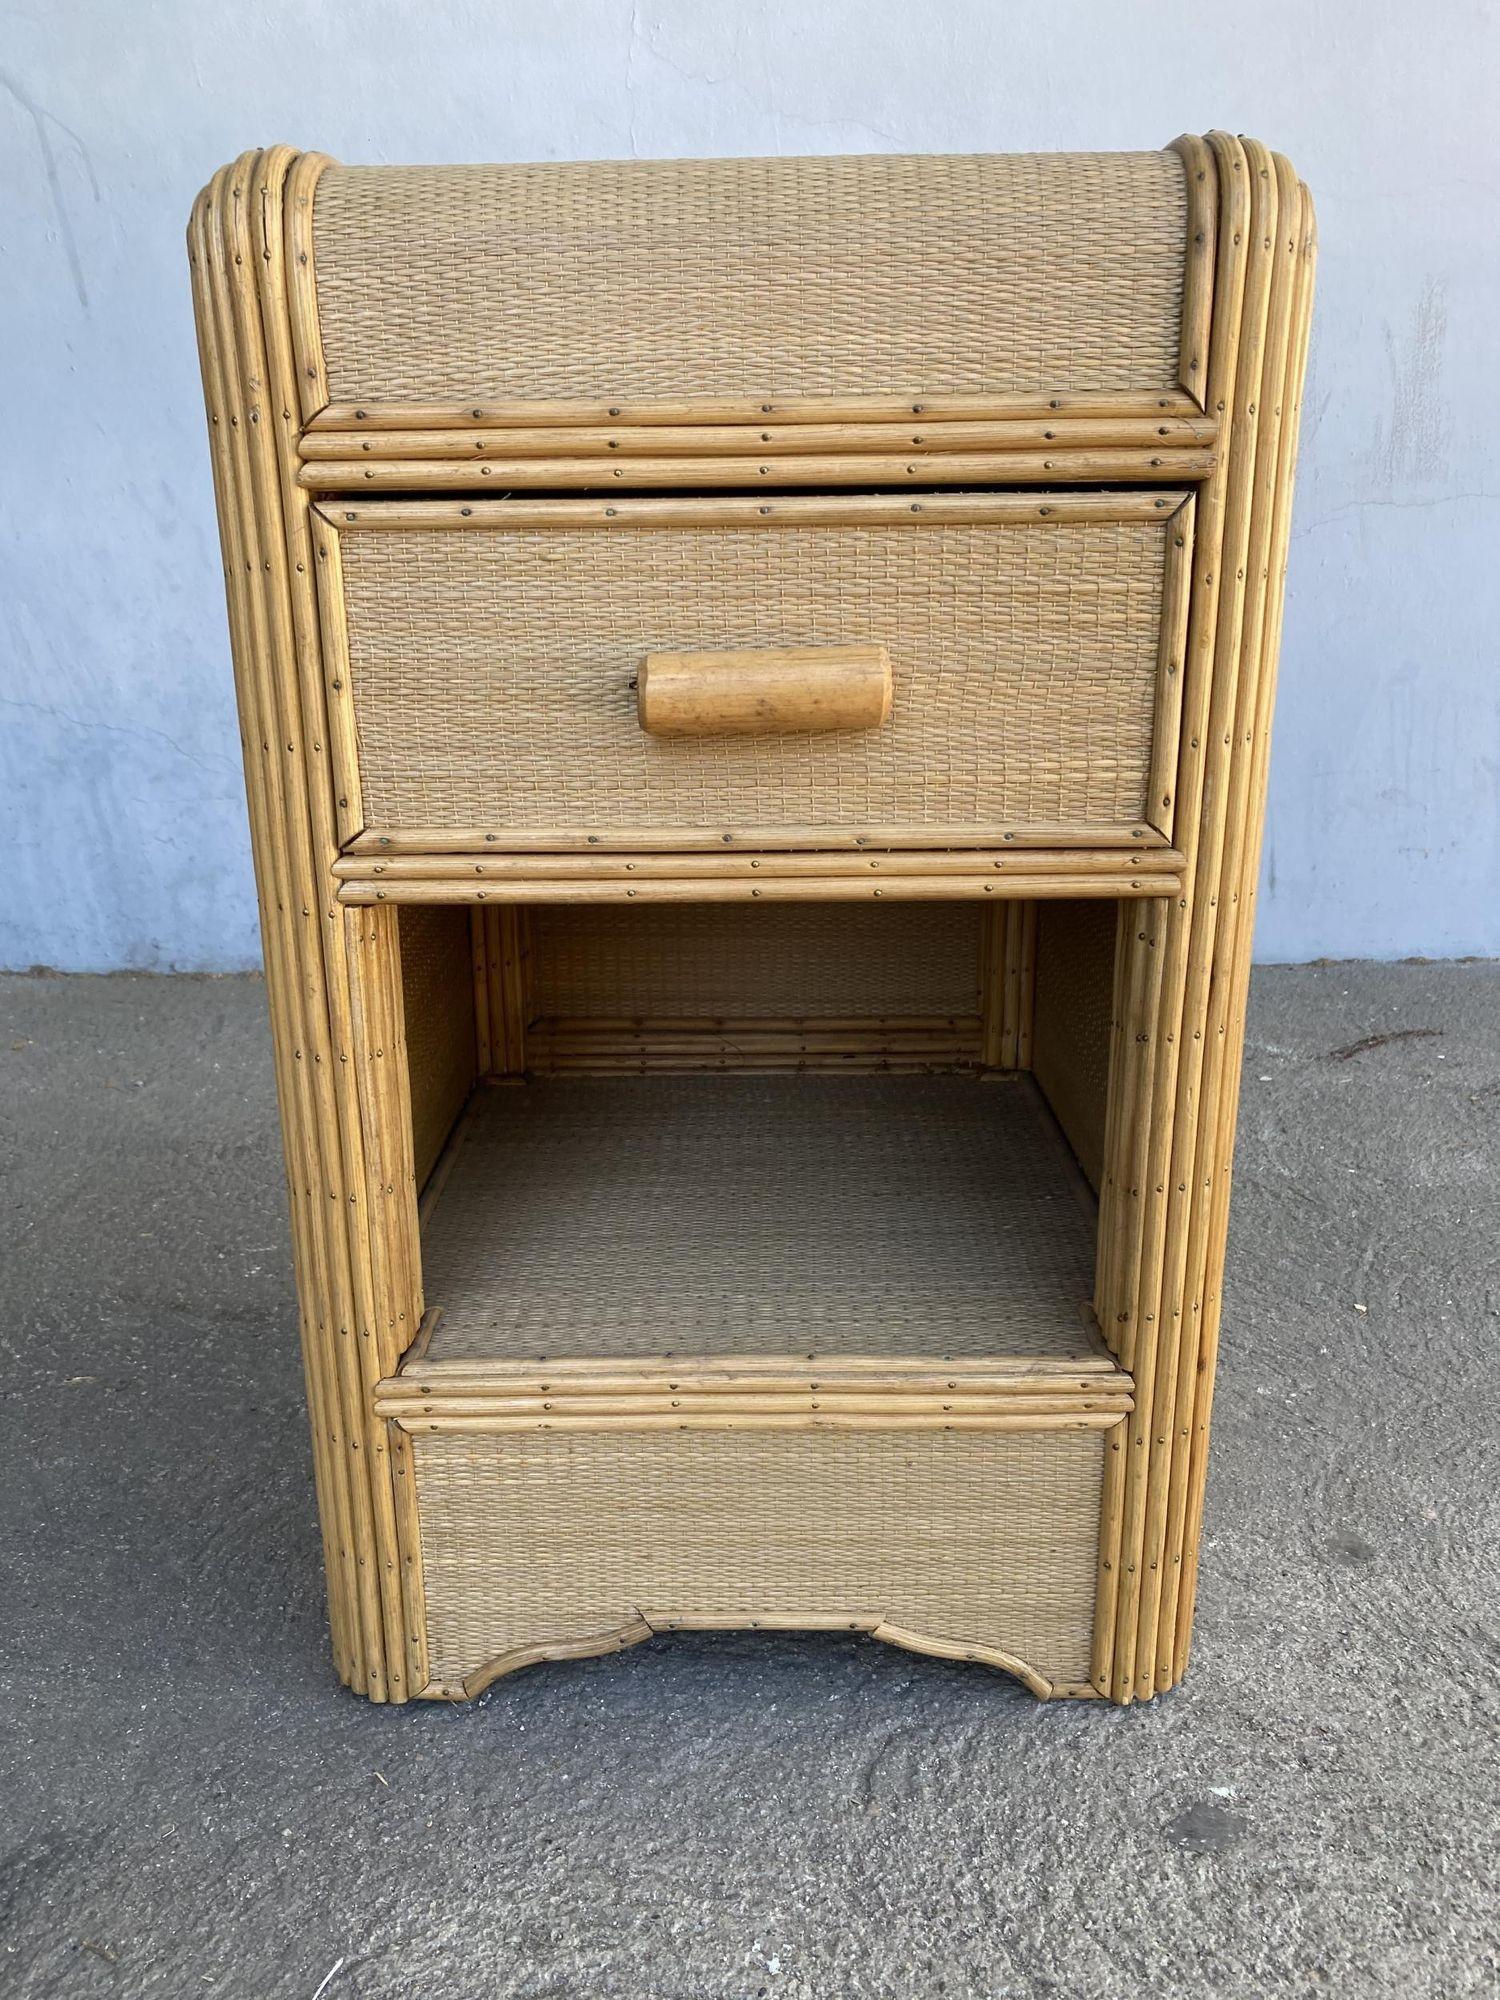 Streamline stick rattan side table with Grass-mat coverings, a Rattan pull handle, and edges are finished with brass nails.

1930, United States

Designed in the manner of Paul Frankl.

We only purchase and sell only the best and finest rattan